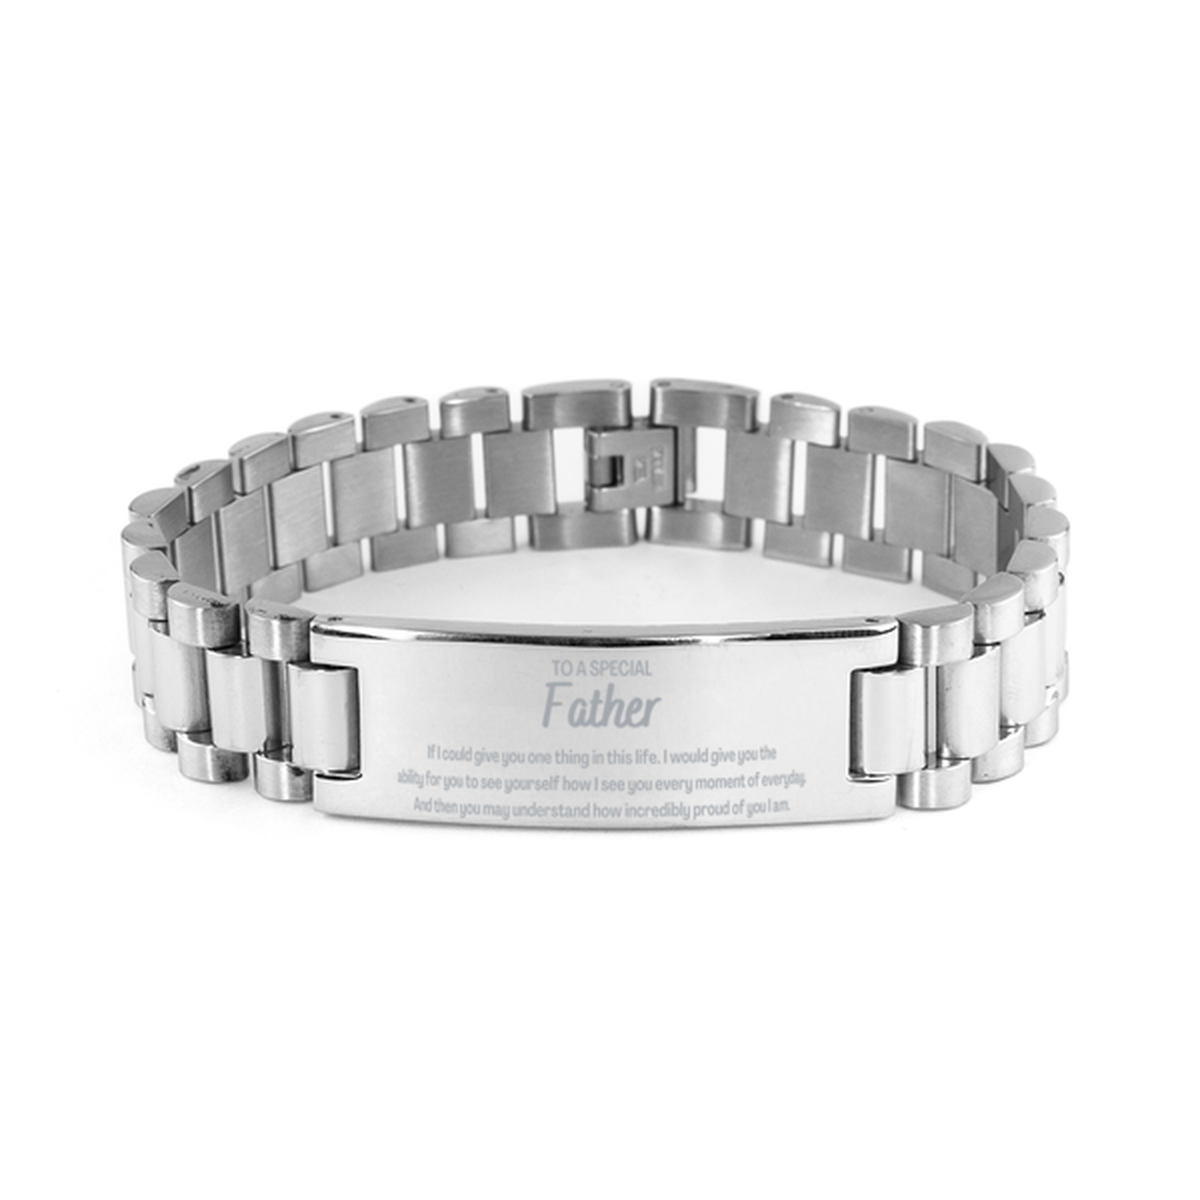 To My Father Ladder Stainless Steel Bracelet, Gifts For Father Engraved, Inspirational Gifts for Christmas Birthday, Epic Gifts for Father To A Special Father how incredibly proud of you I am